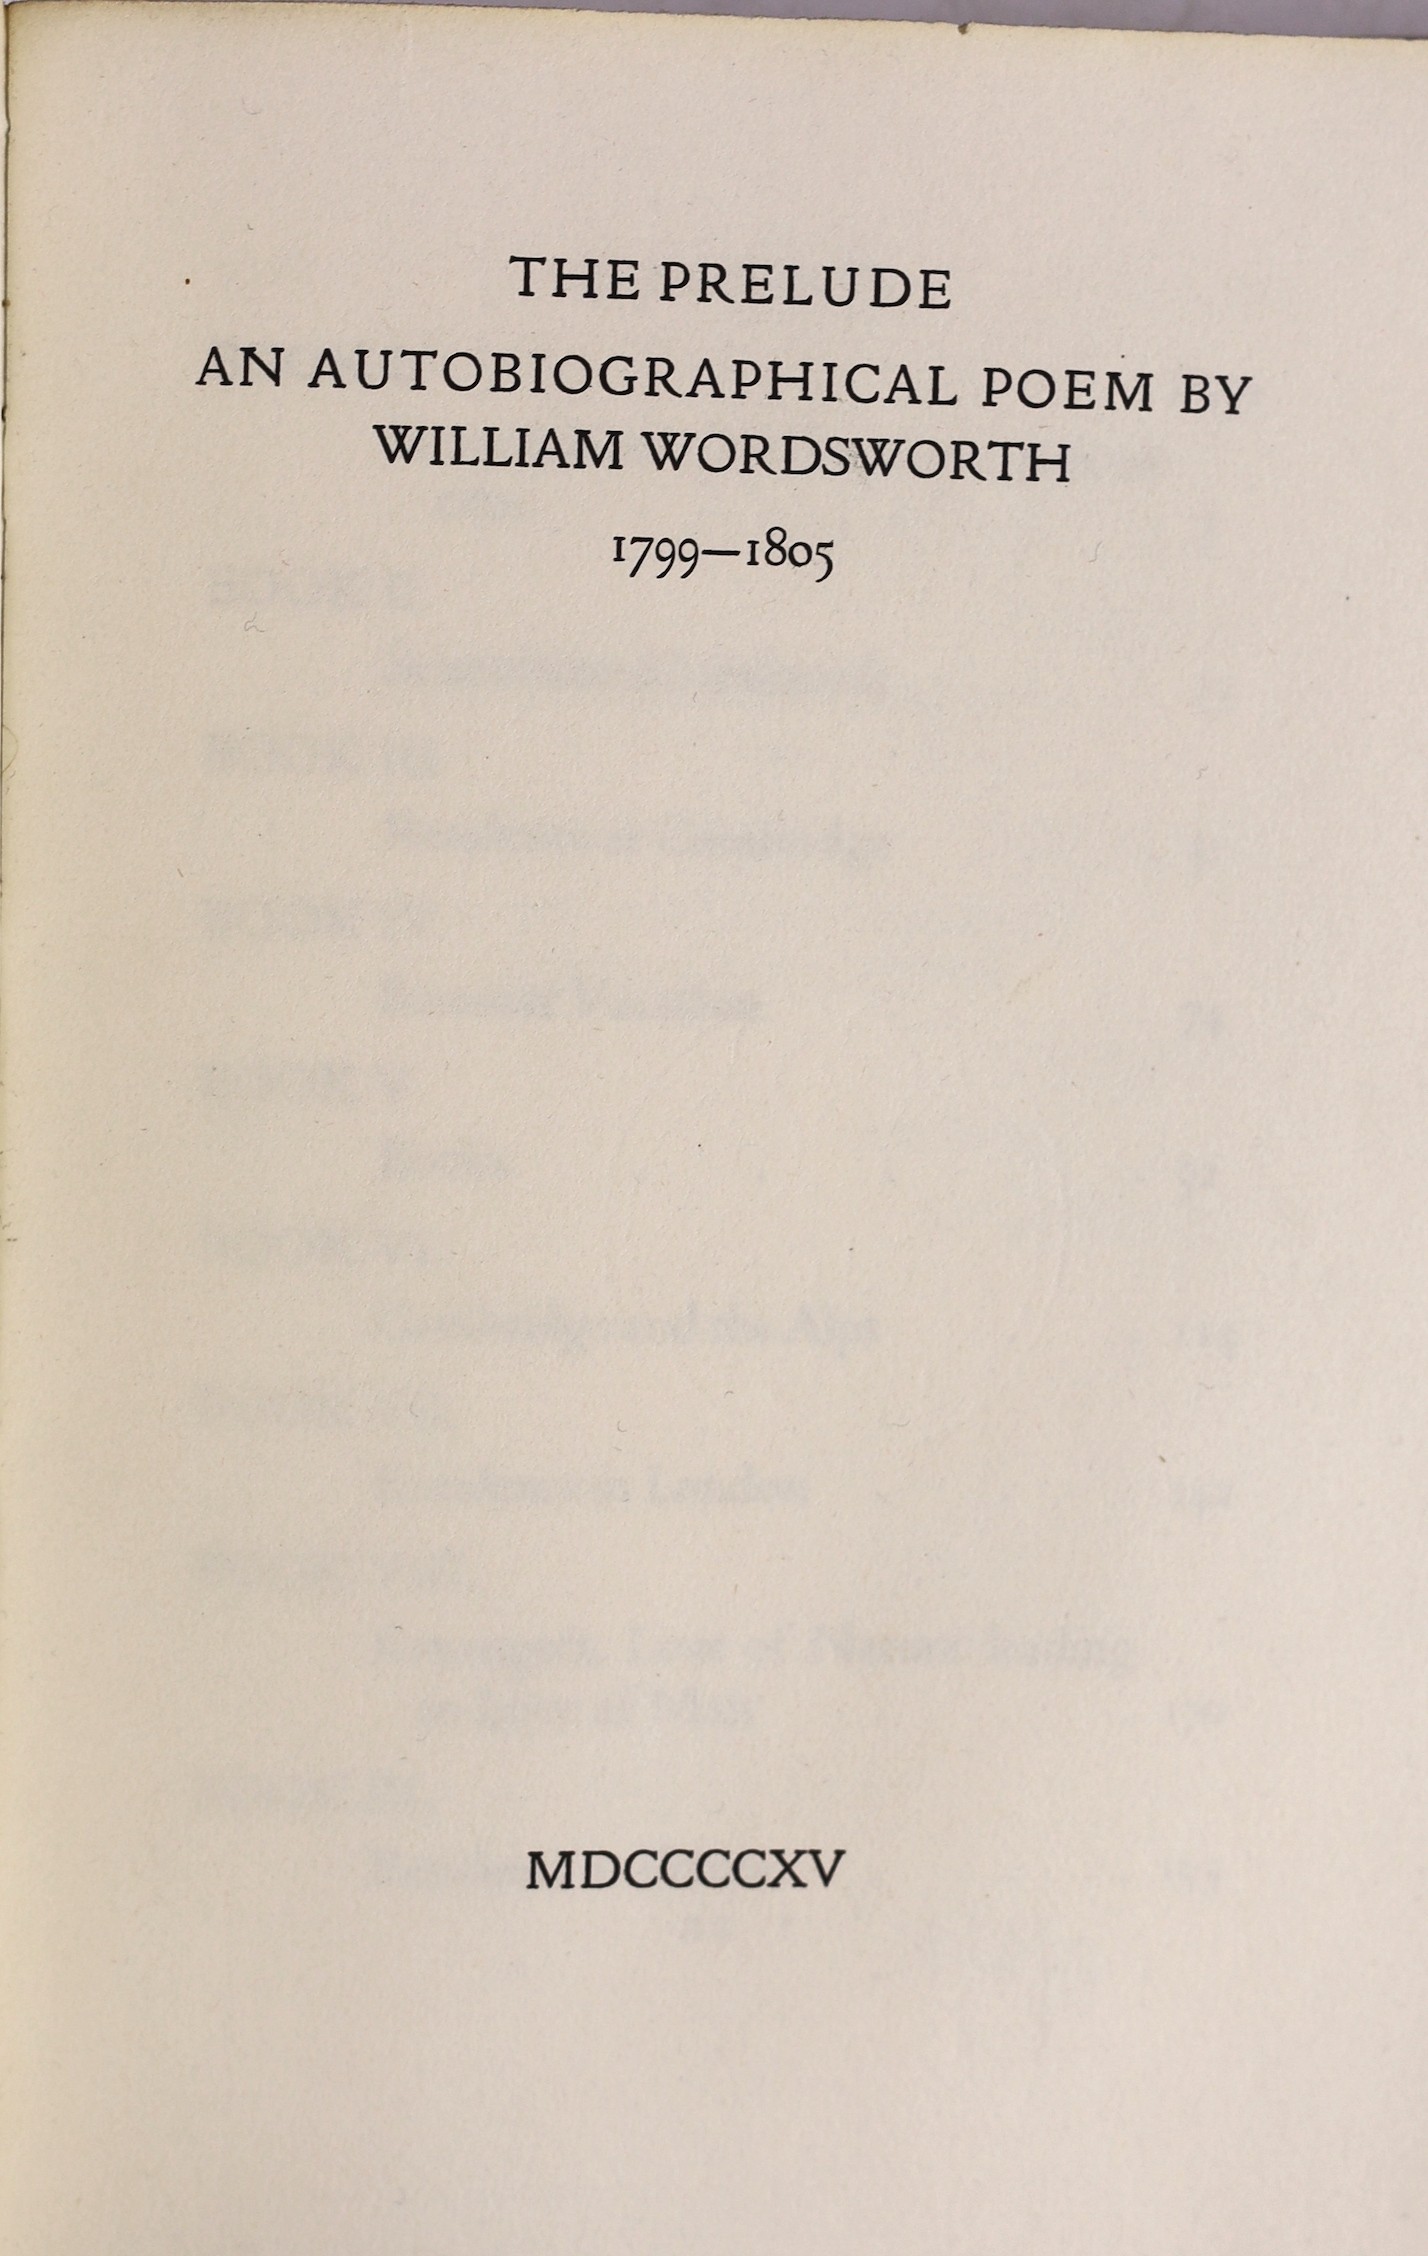 Doves Press, London - Wordsworth, William - The Prelude: An Autobiographical Poem, one of 155, printed in red and black letter, 8vo, original full, limp vellum, spine gilt-lettered, London, 1915